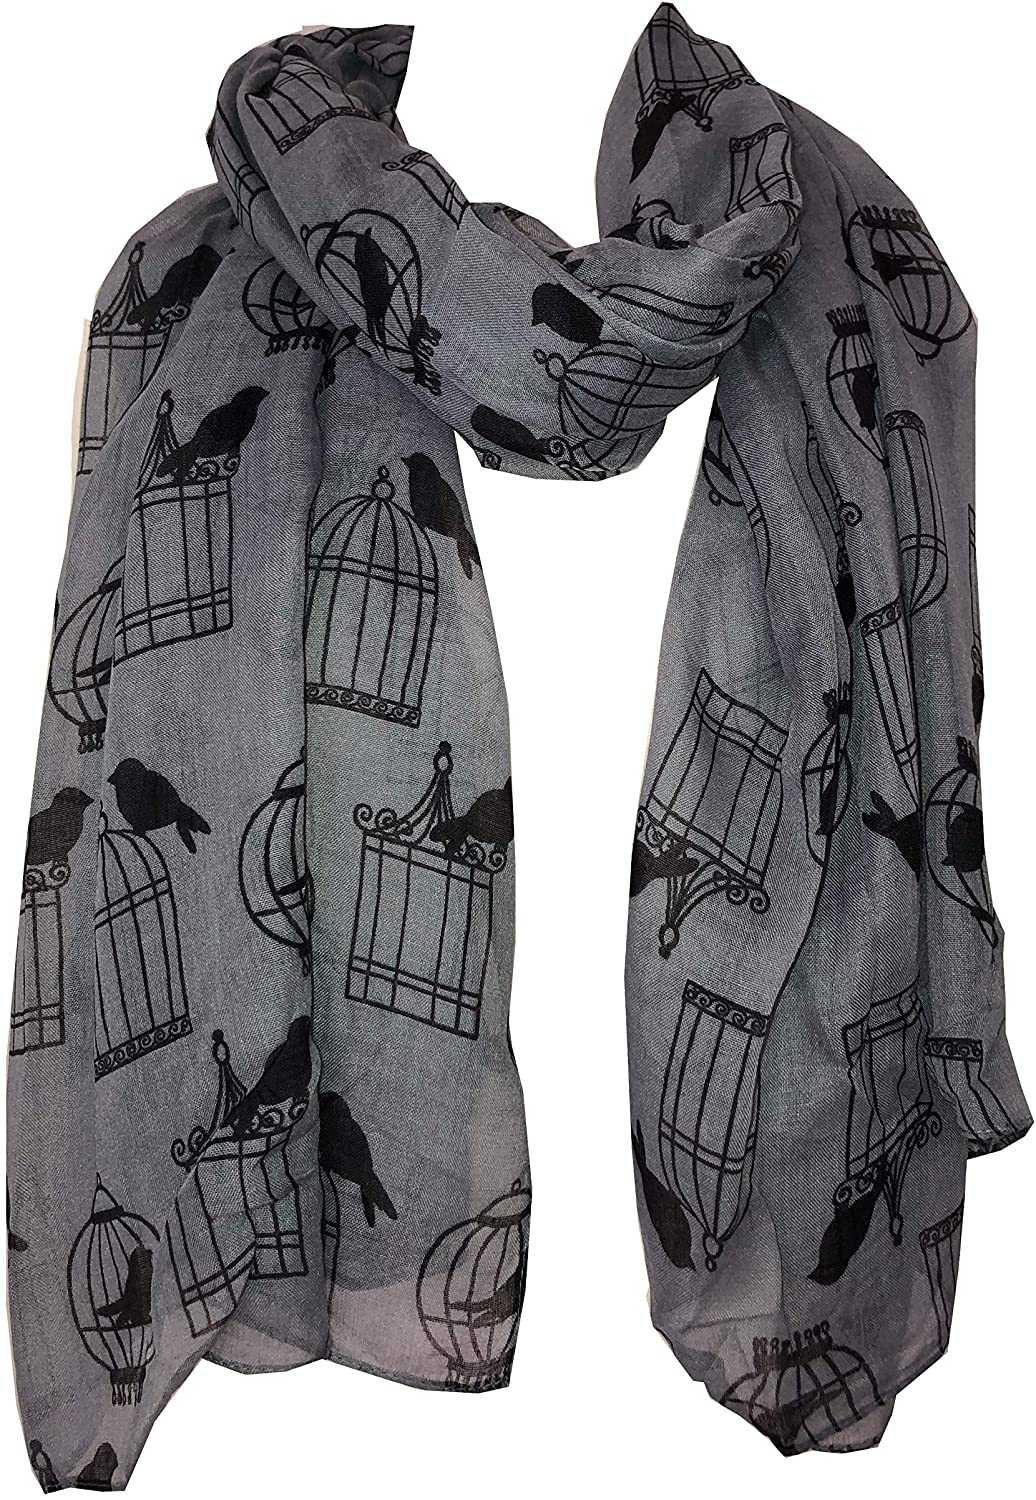 Pamper Yourself Now Grey with Black Bird cage and Bird Design Scarf, Lovely Gift/Present.